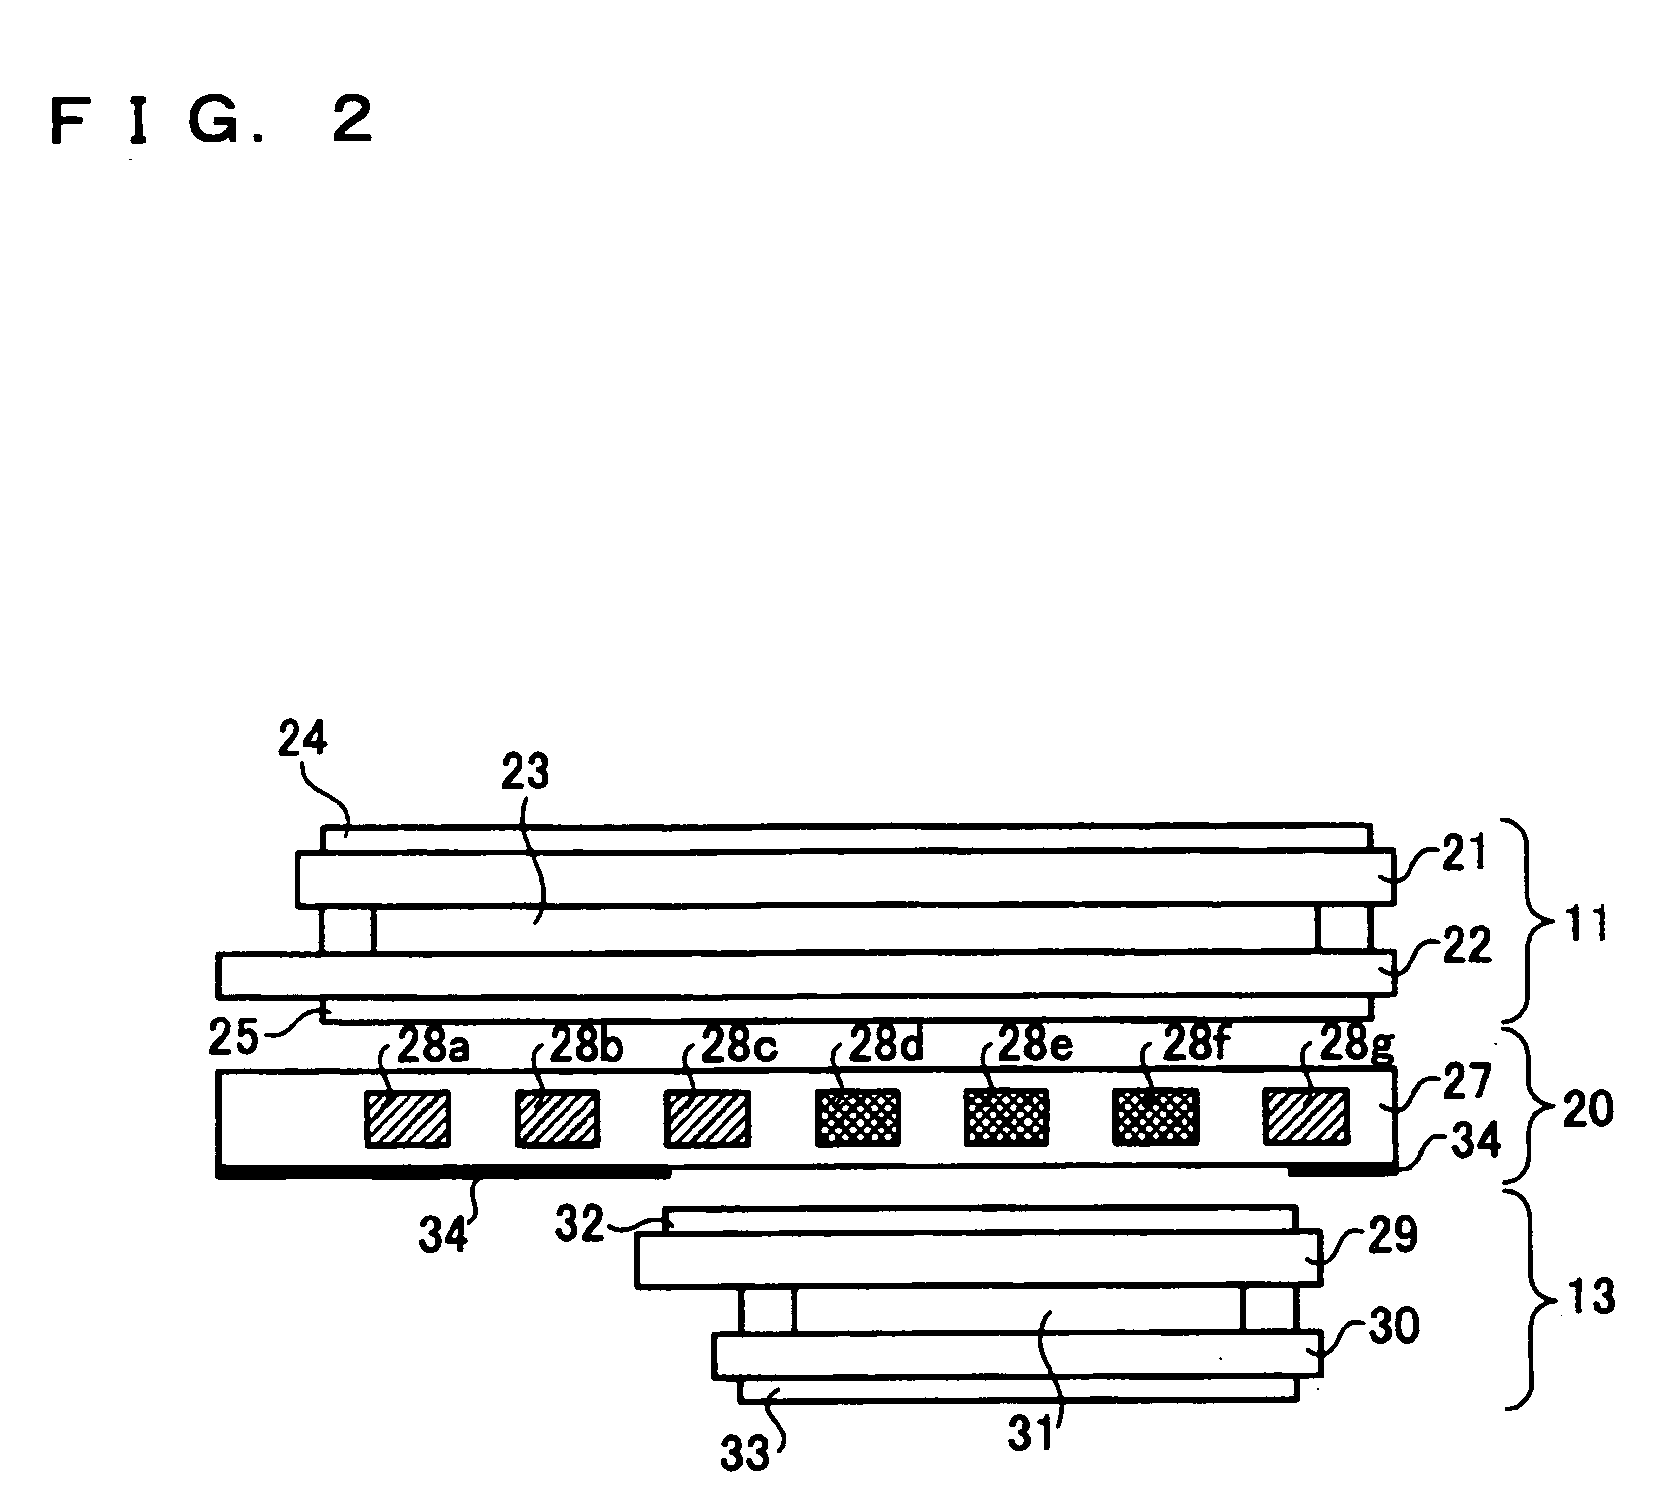 Double-sided liquid crystal display device